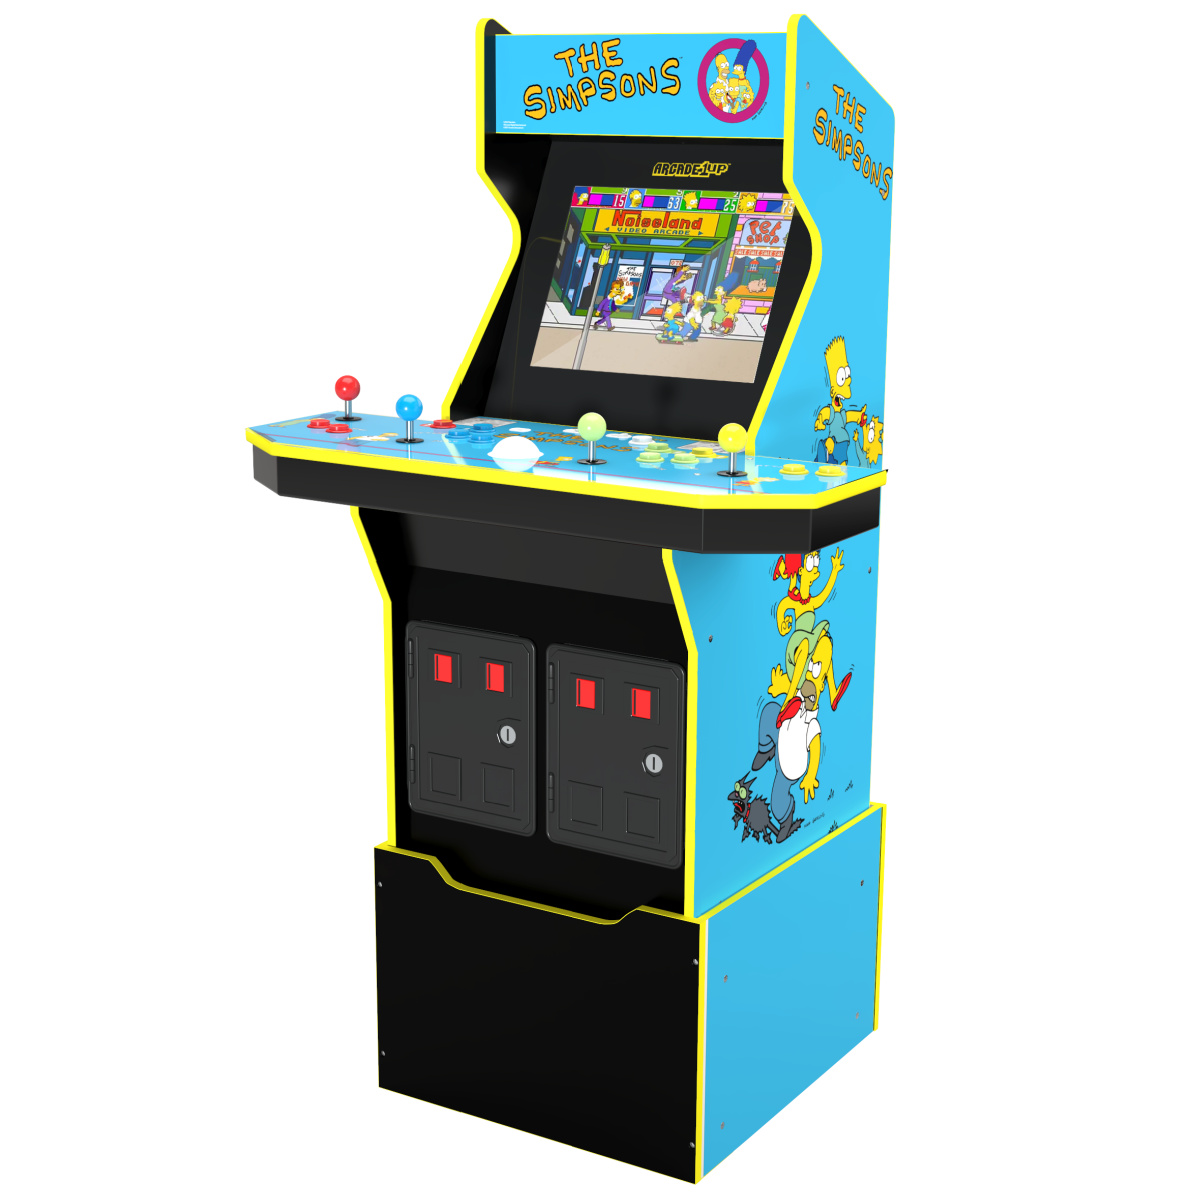 Arcade1Up The Simpsons Arcade Machine with Riser